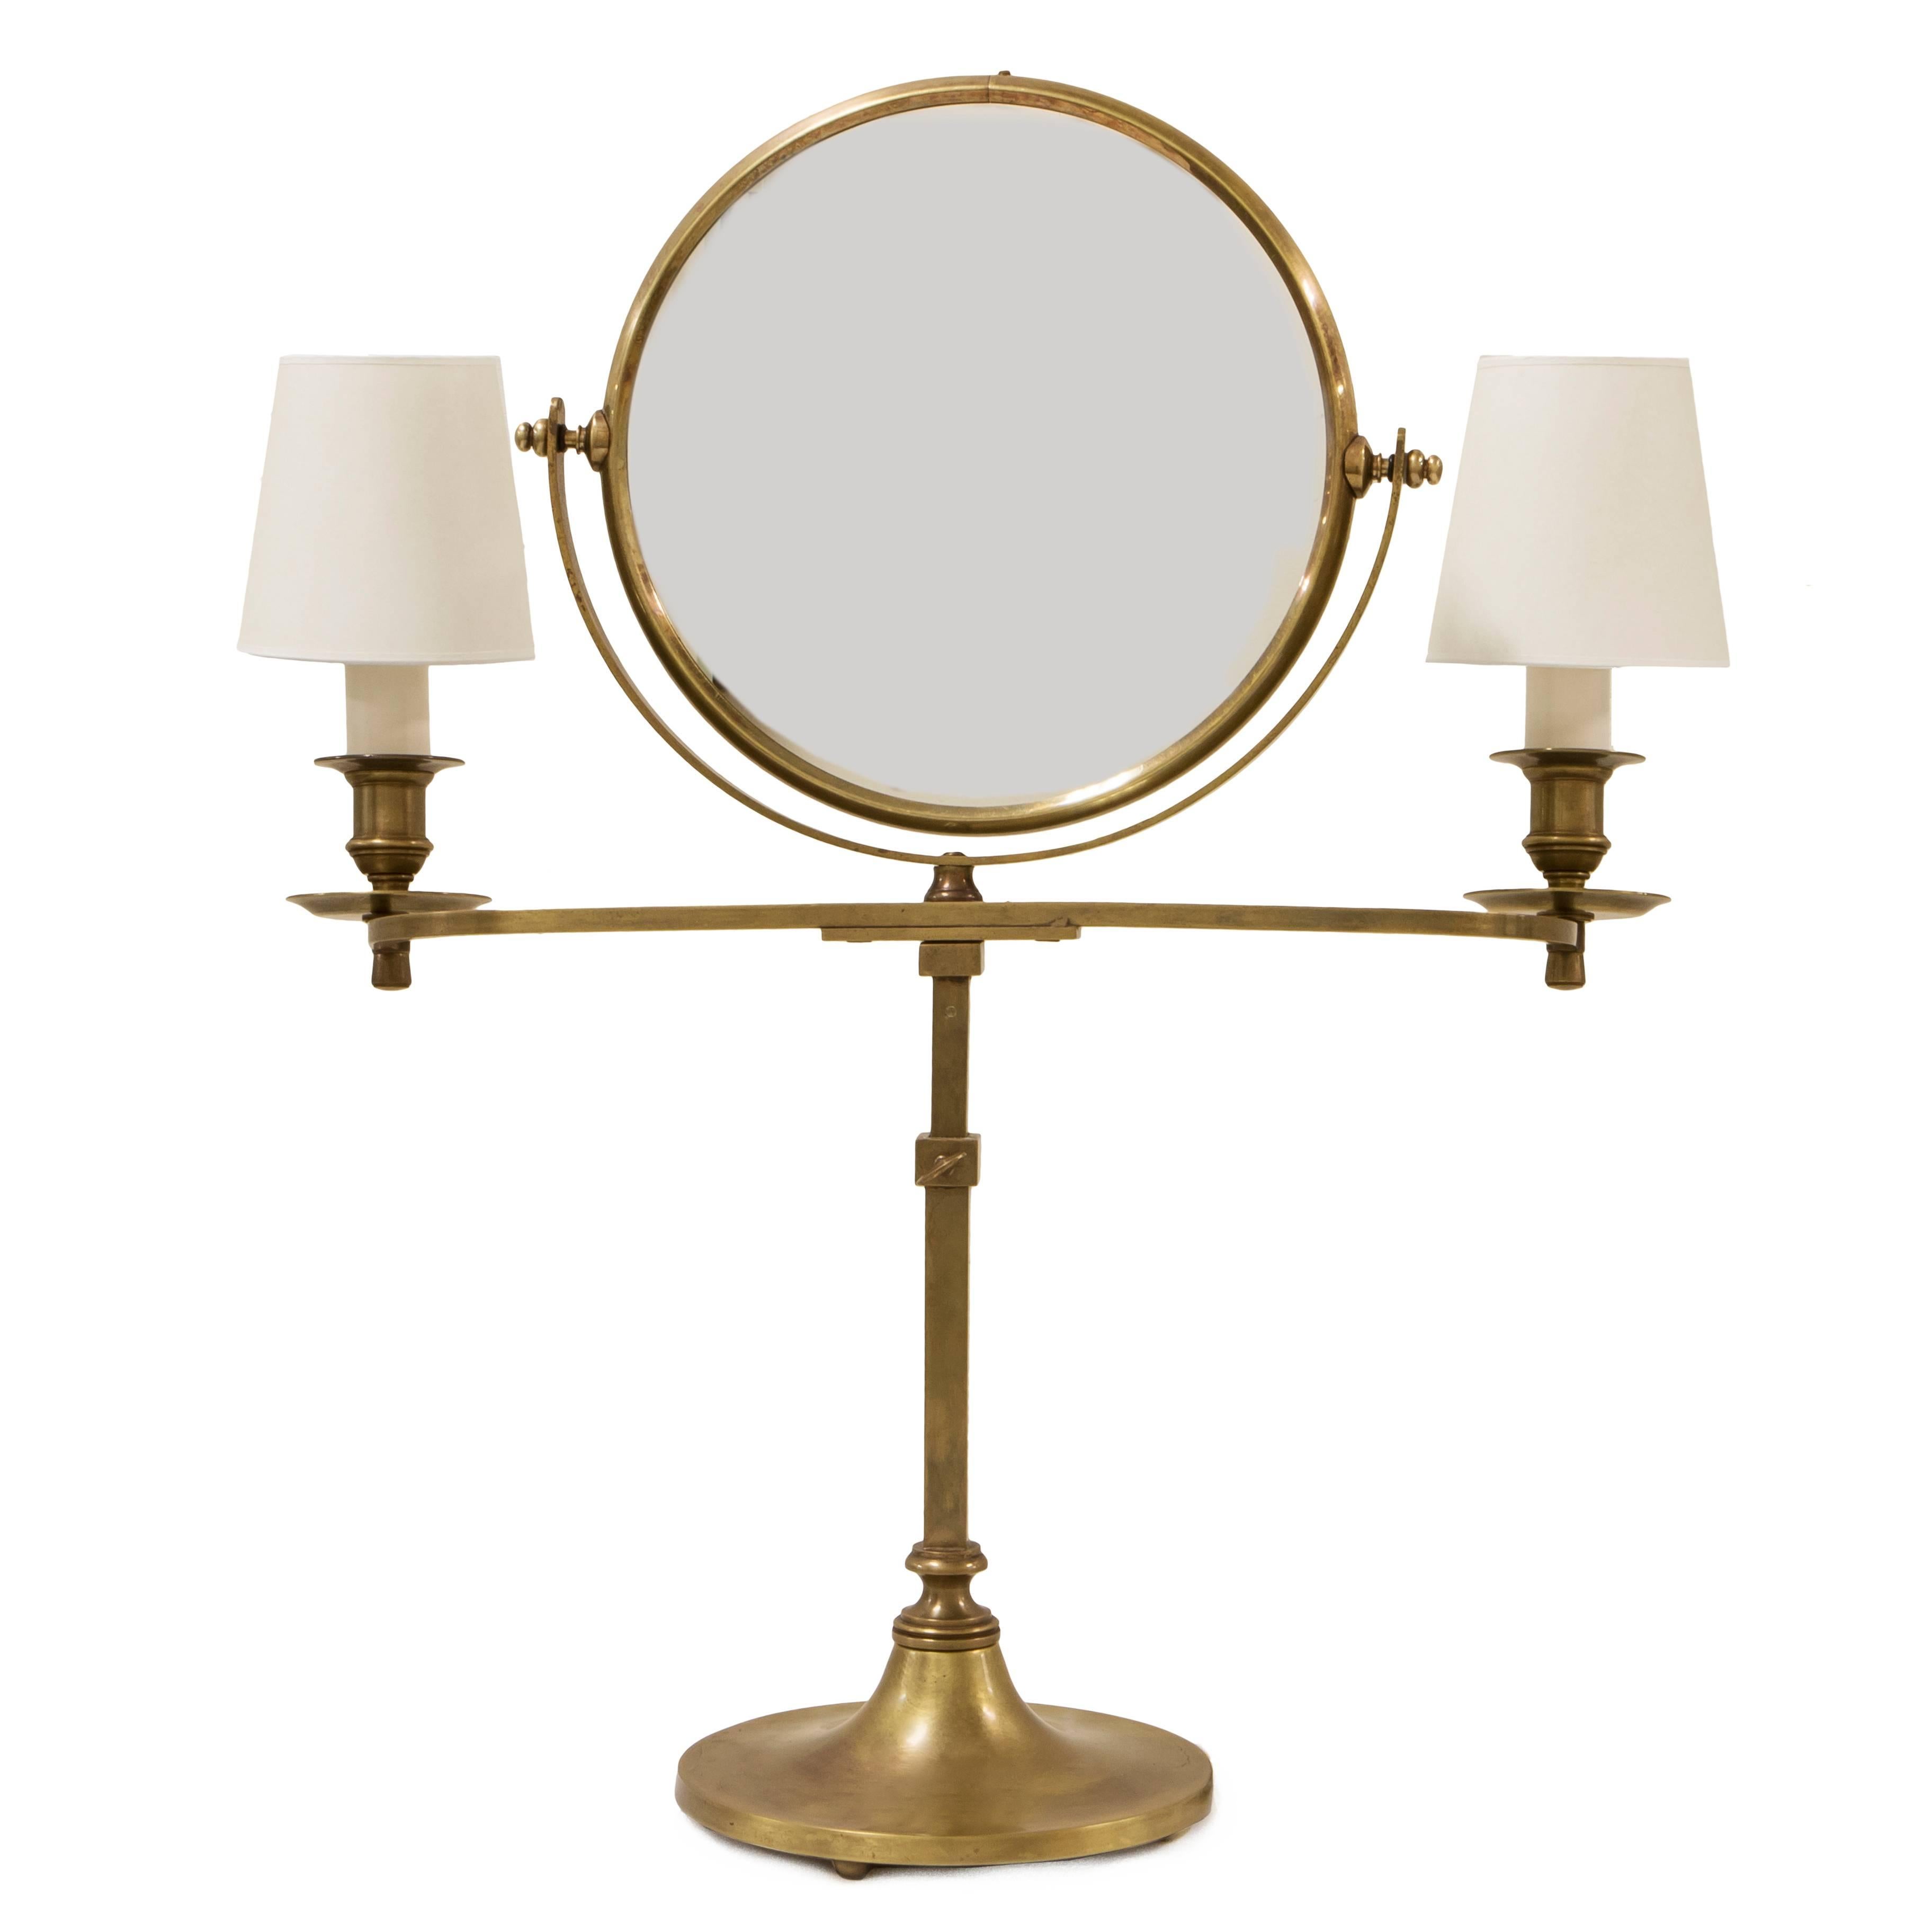 The flip mirror is a flat mirror on one side and a magnifying mirror on the other. Two candelabra base bulbs and clip on shades, on/off on cord. Comes with bulbs.